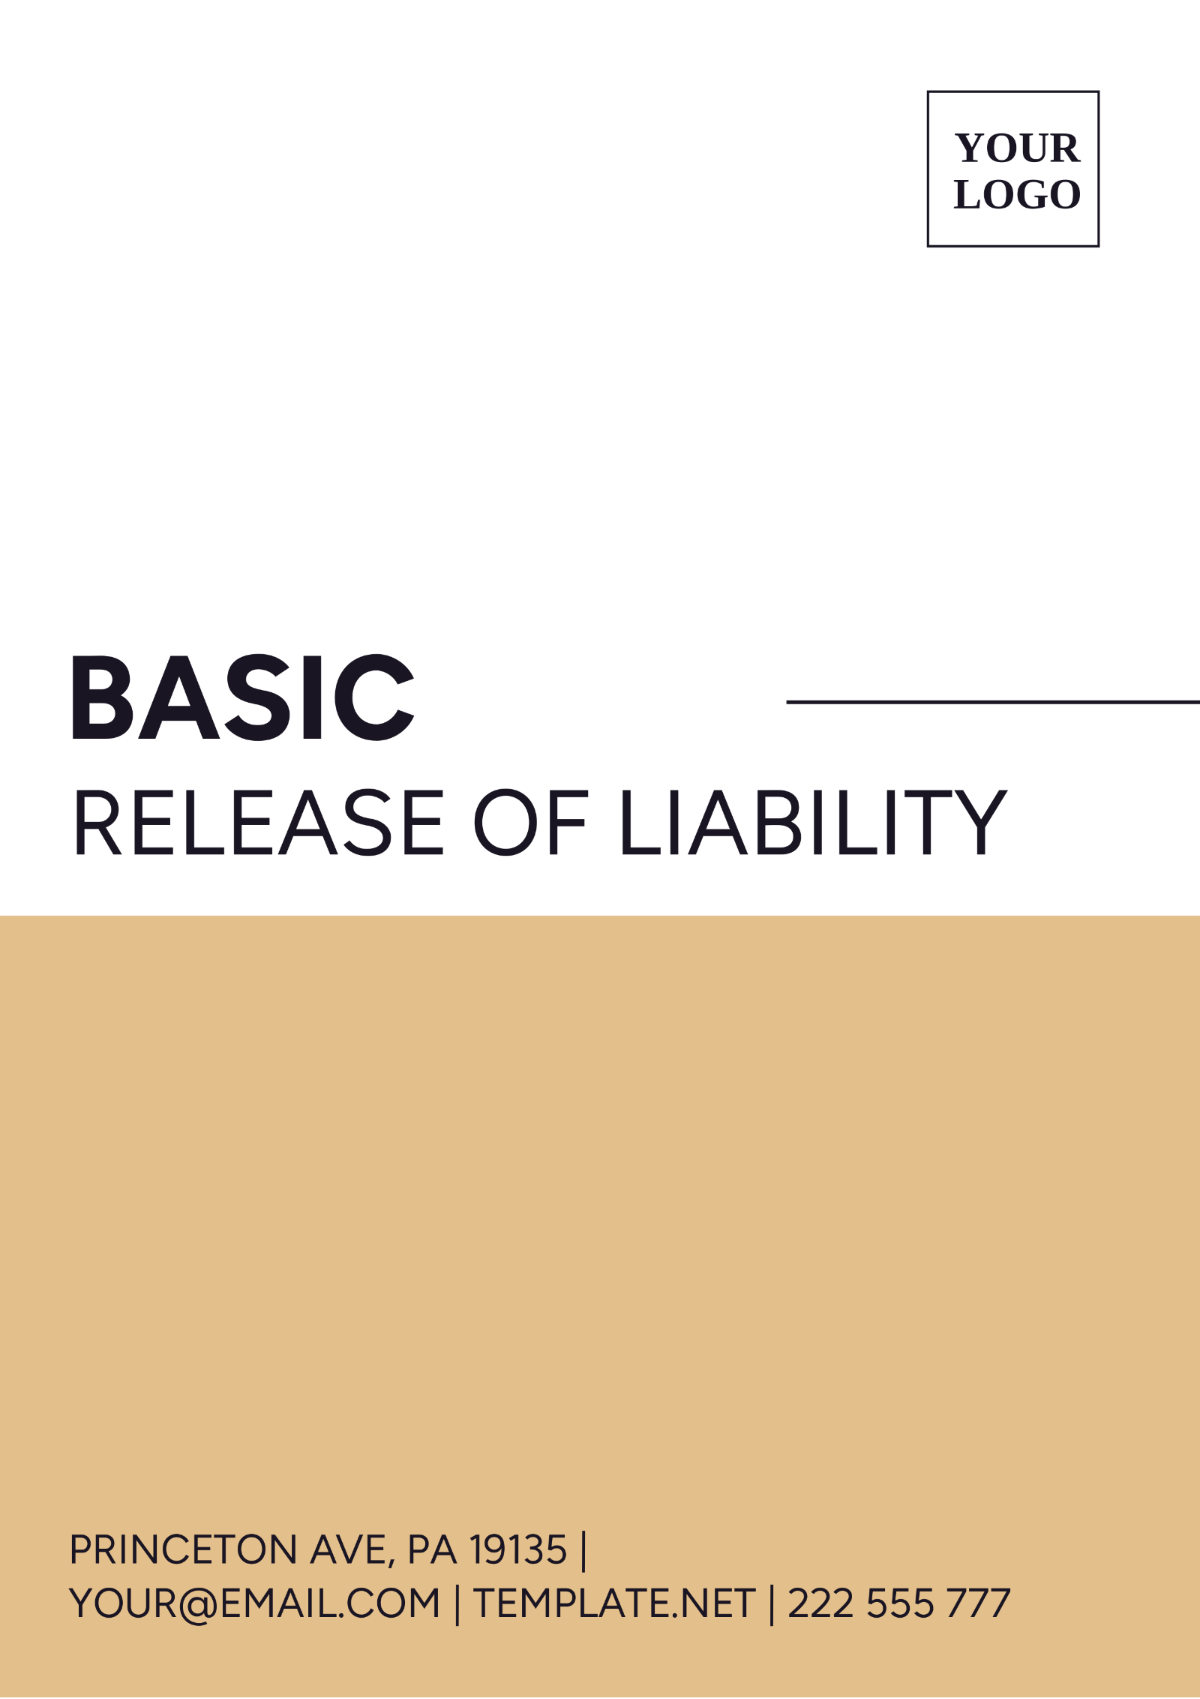 Basic Release of Liability Template